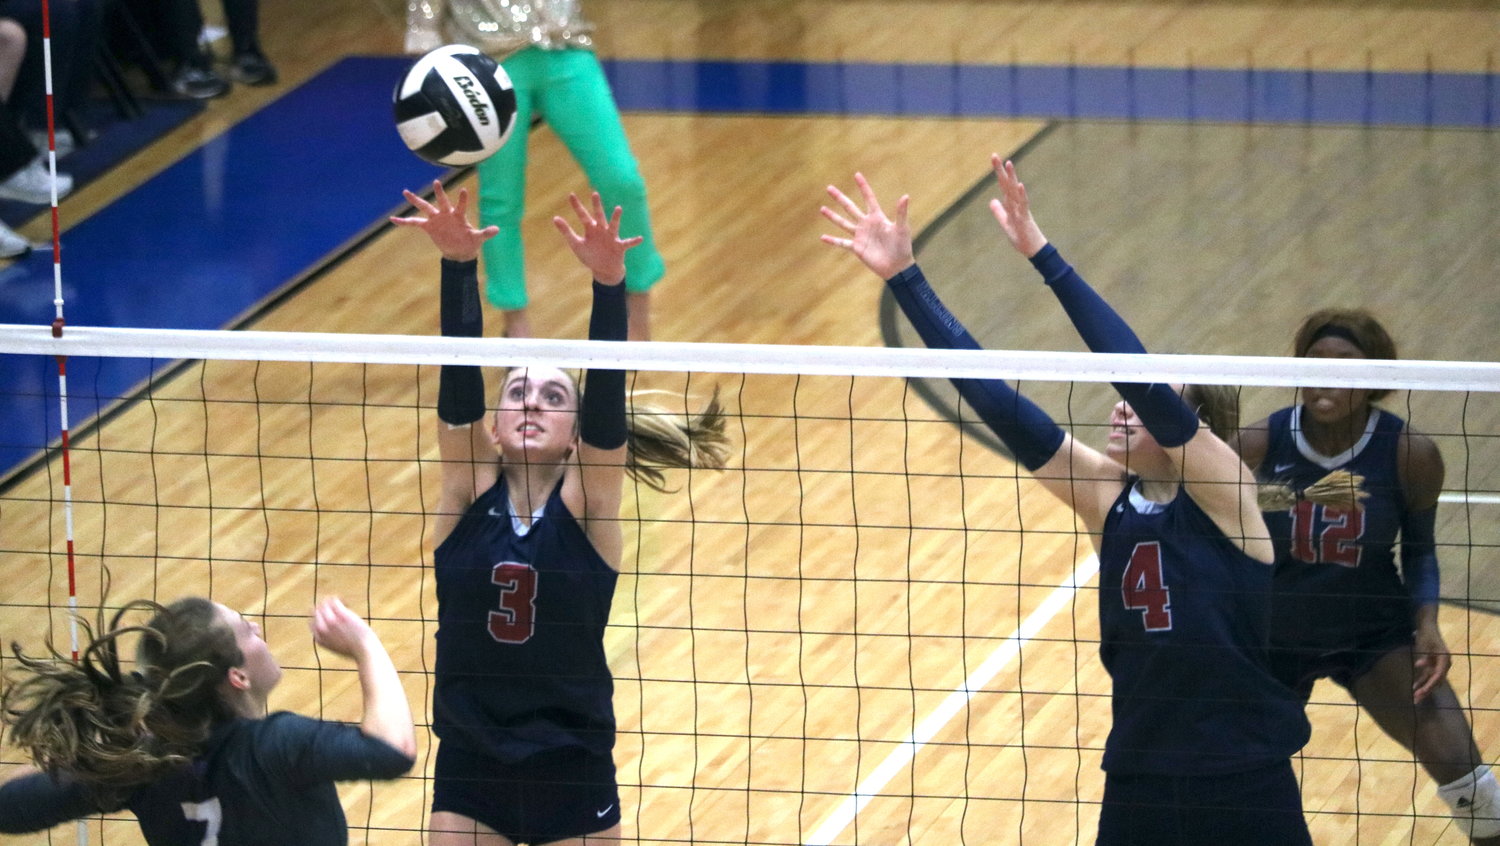 Presley Powell and Callie Funk attempt to block a kill attempt during Tuesday's match between Tompkins and Ridge Point at Wheeler Field House.